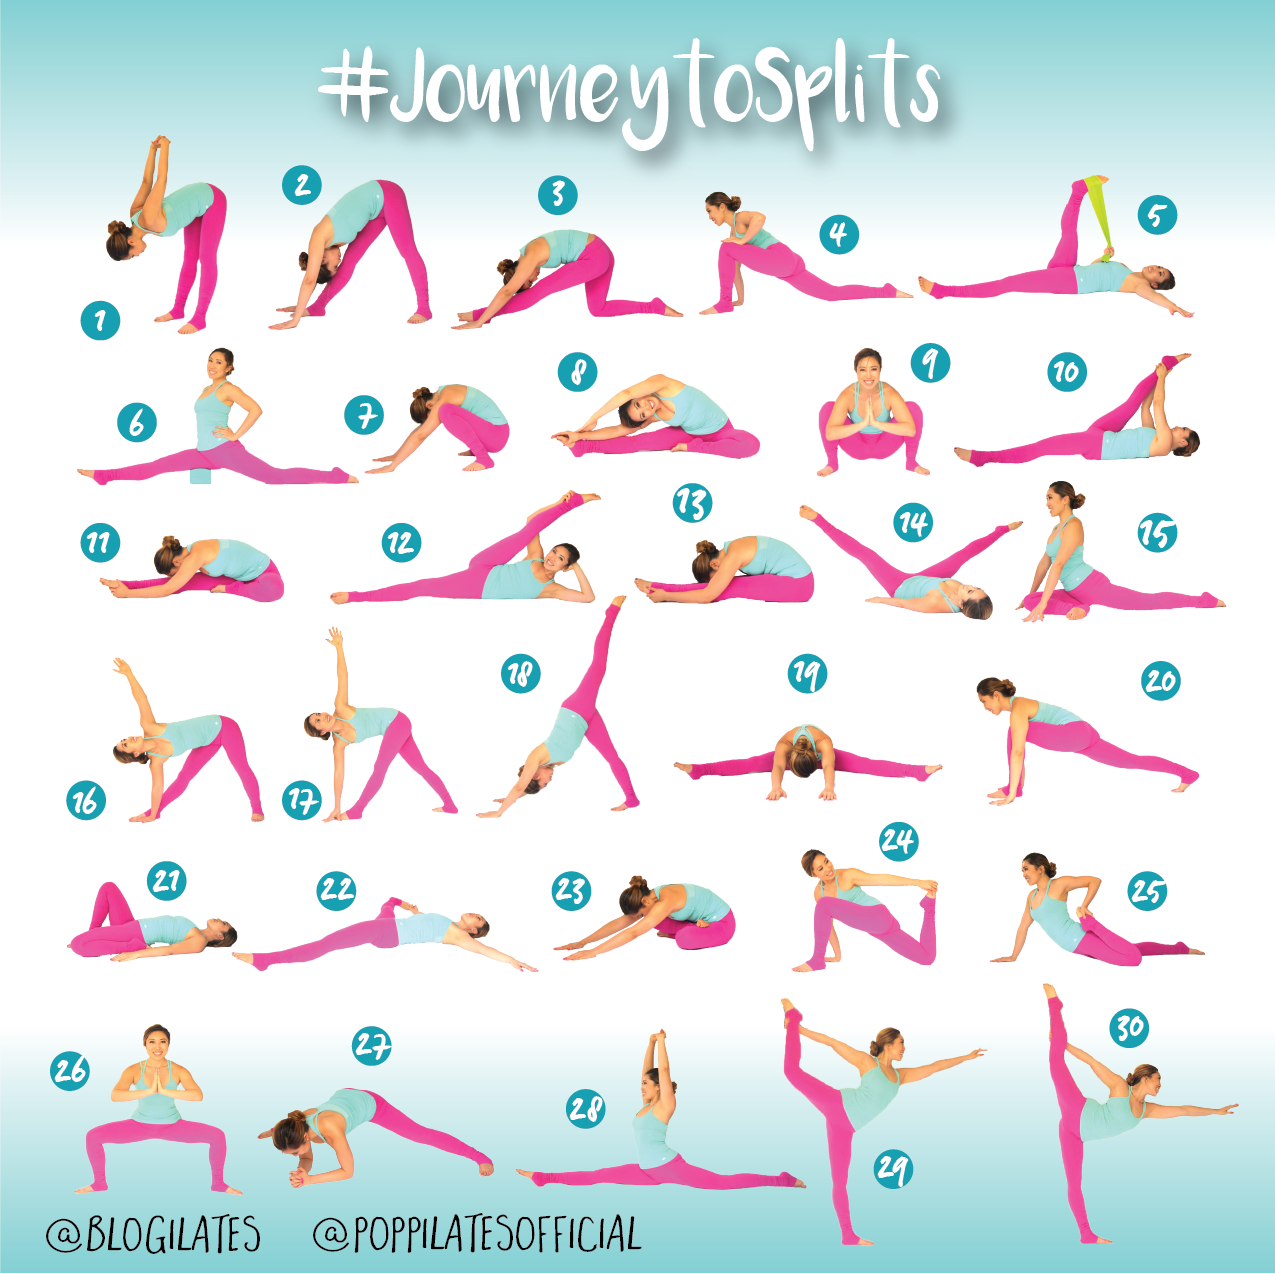 Days Stretches To Splits Journeytosplits Blogilates Fitness Food And Lots Of